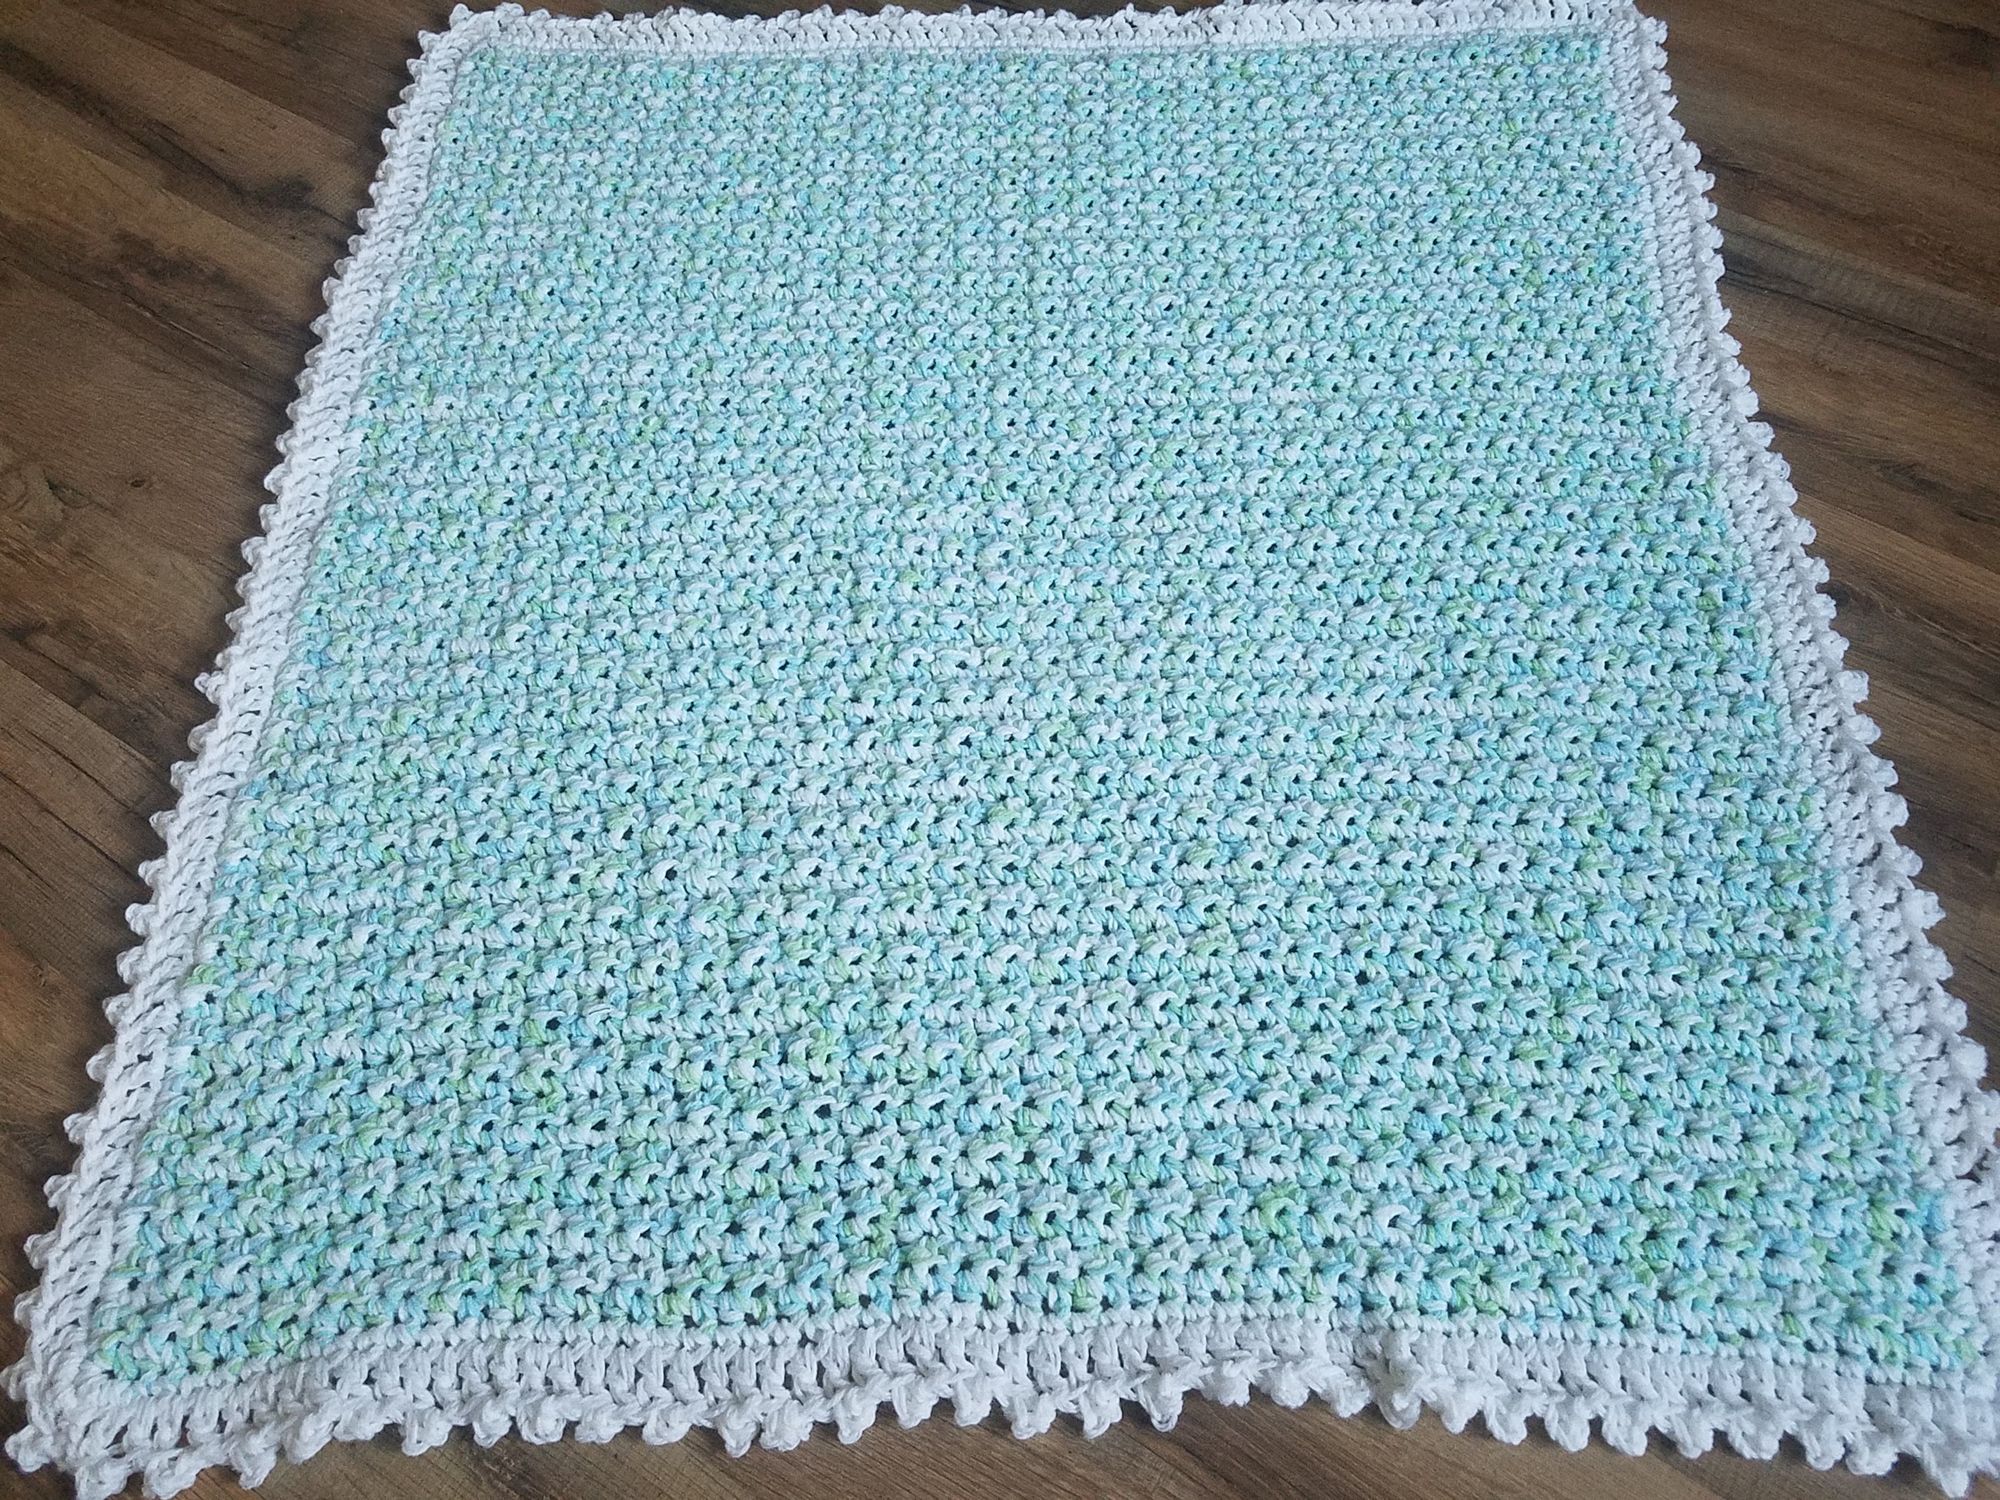 New Baby Blanket Is Completed